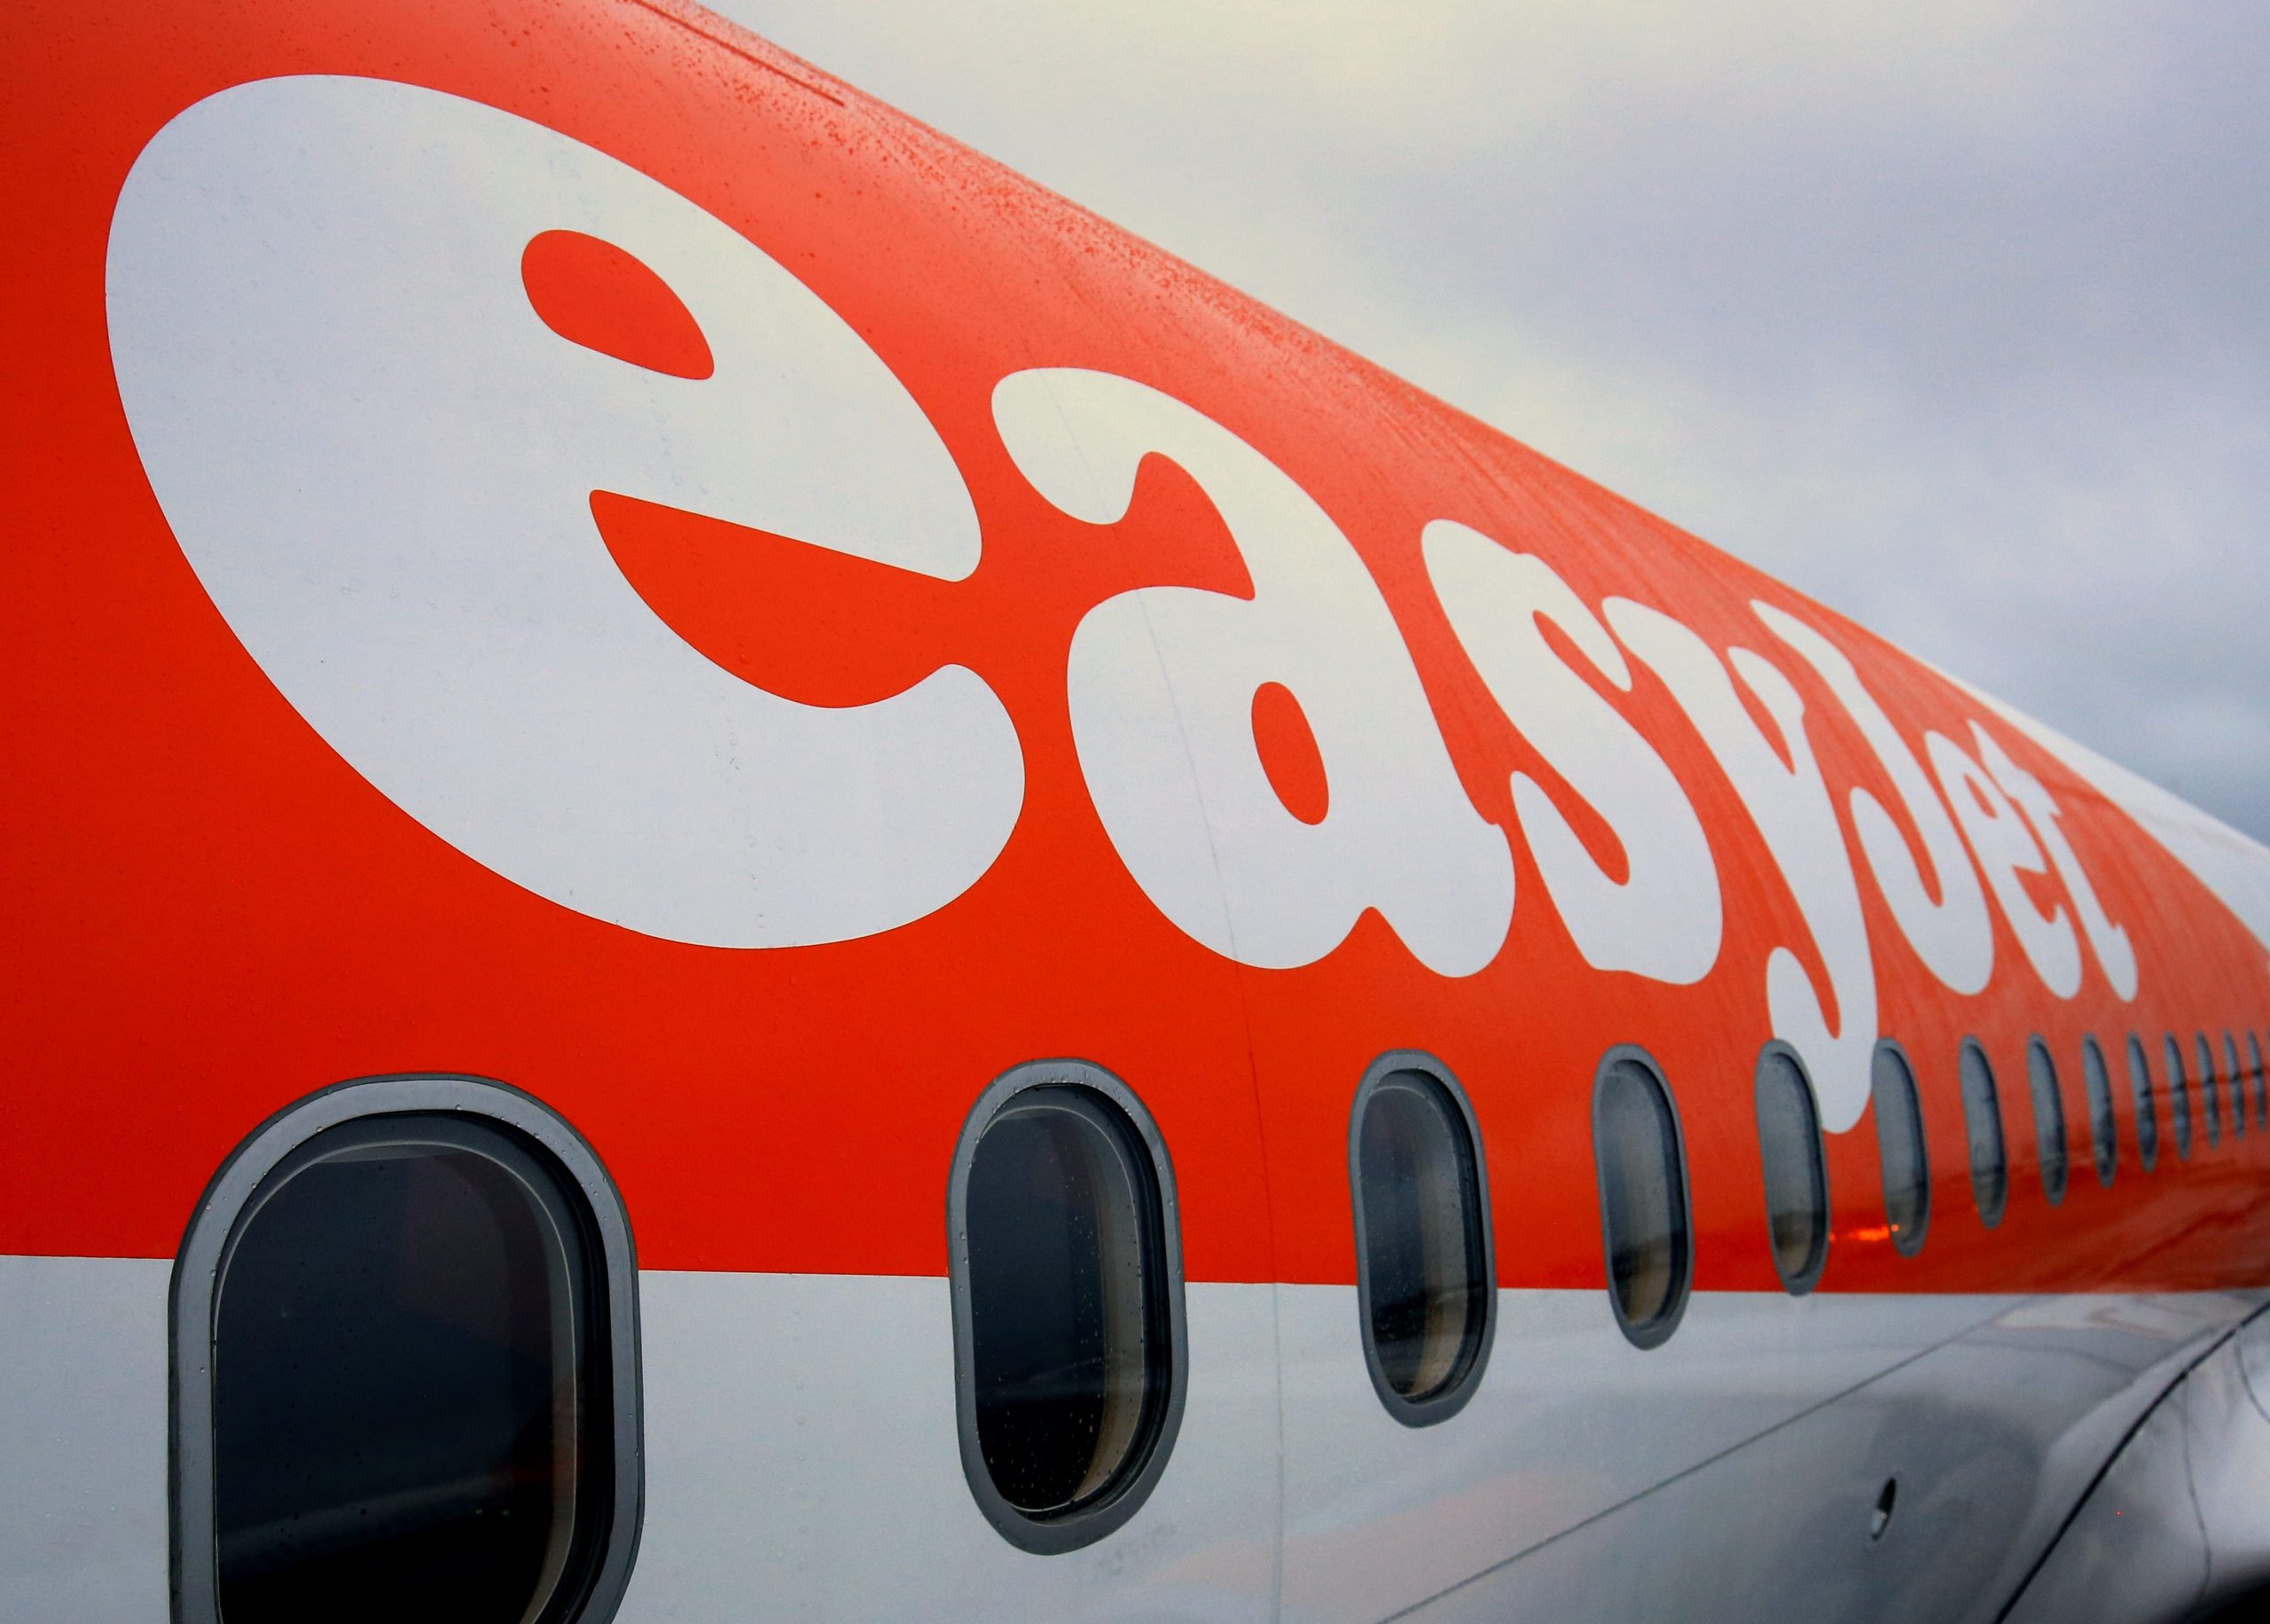 Heavily pregnant woman claims she was kicked off EasyJet flight from Belfast to Ibiza over row with staff along with every other passenger after they started chanting for AIR HOSTESS to be kicked off